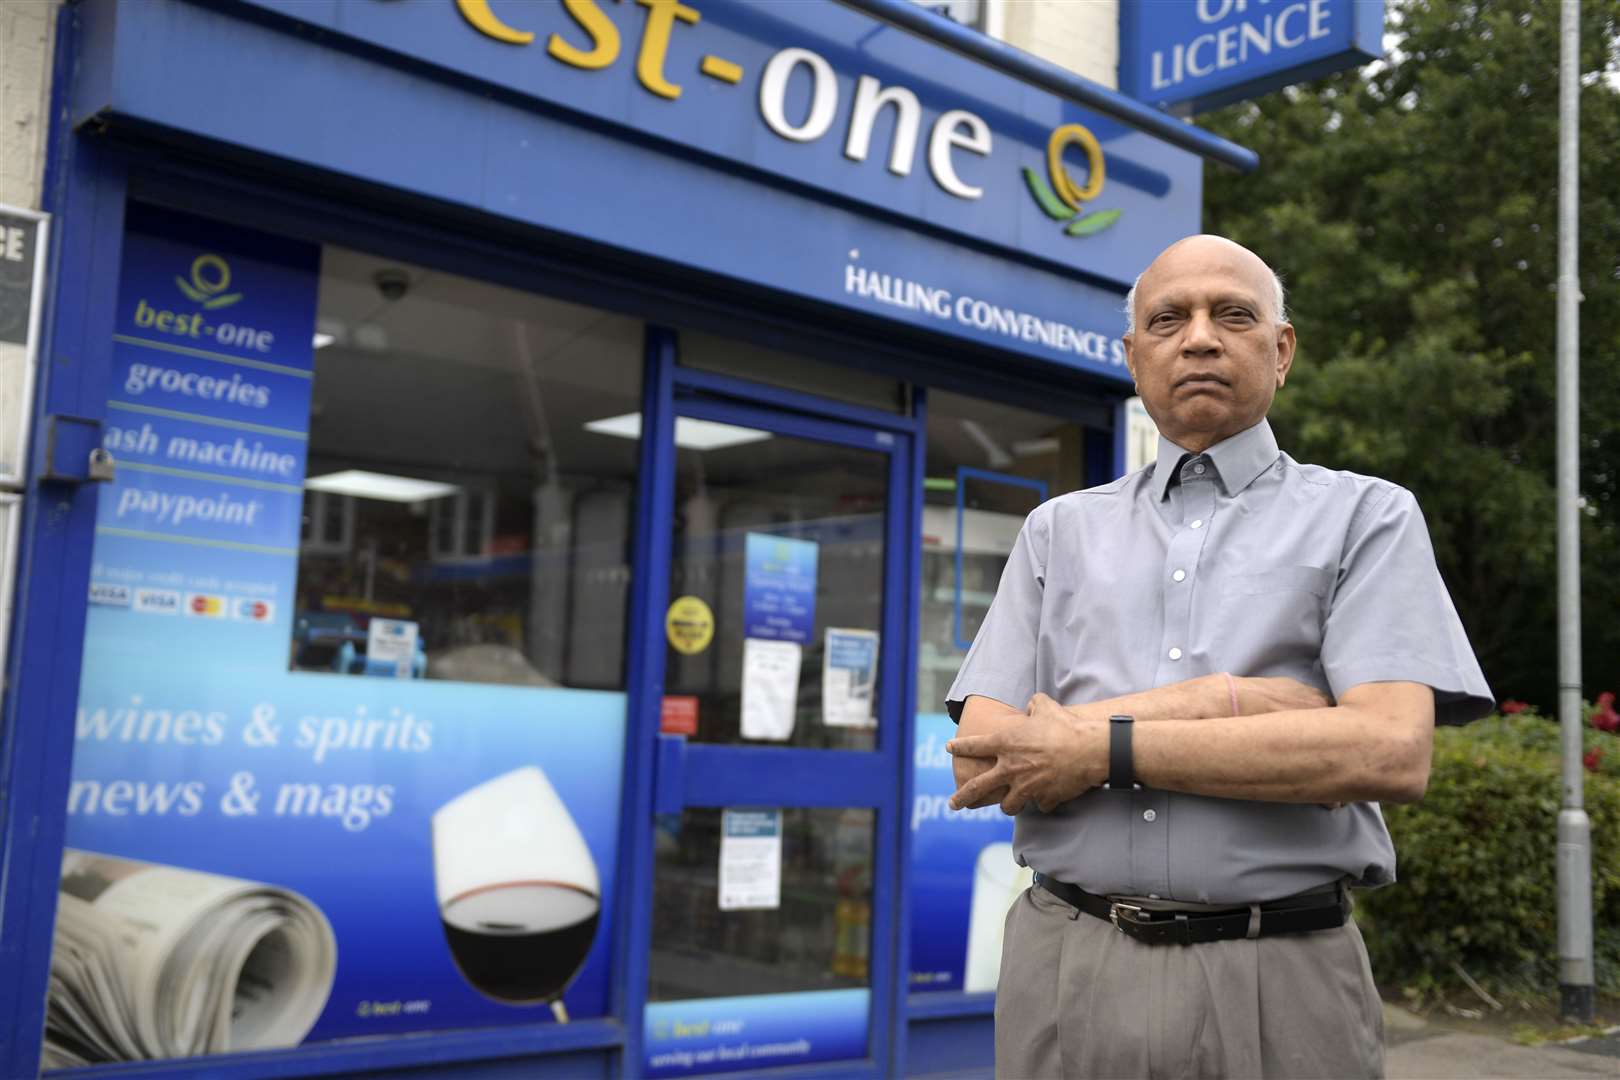 Vinay Patel outside his shop in Halling. Picture: Barry Goodwin